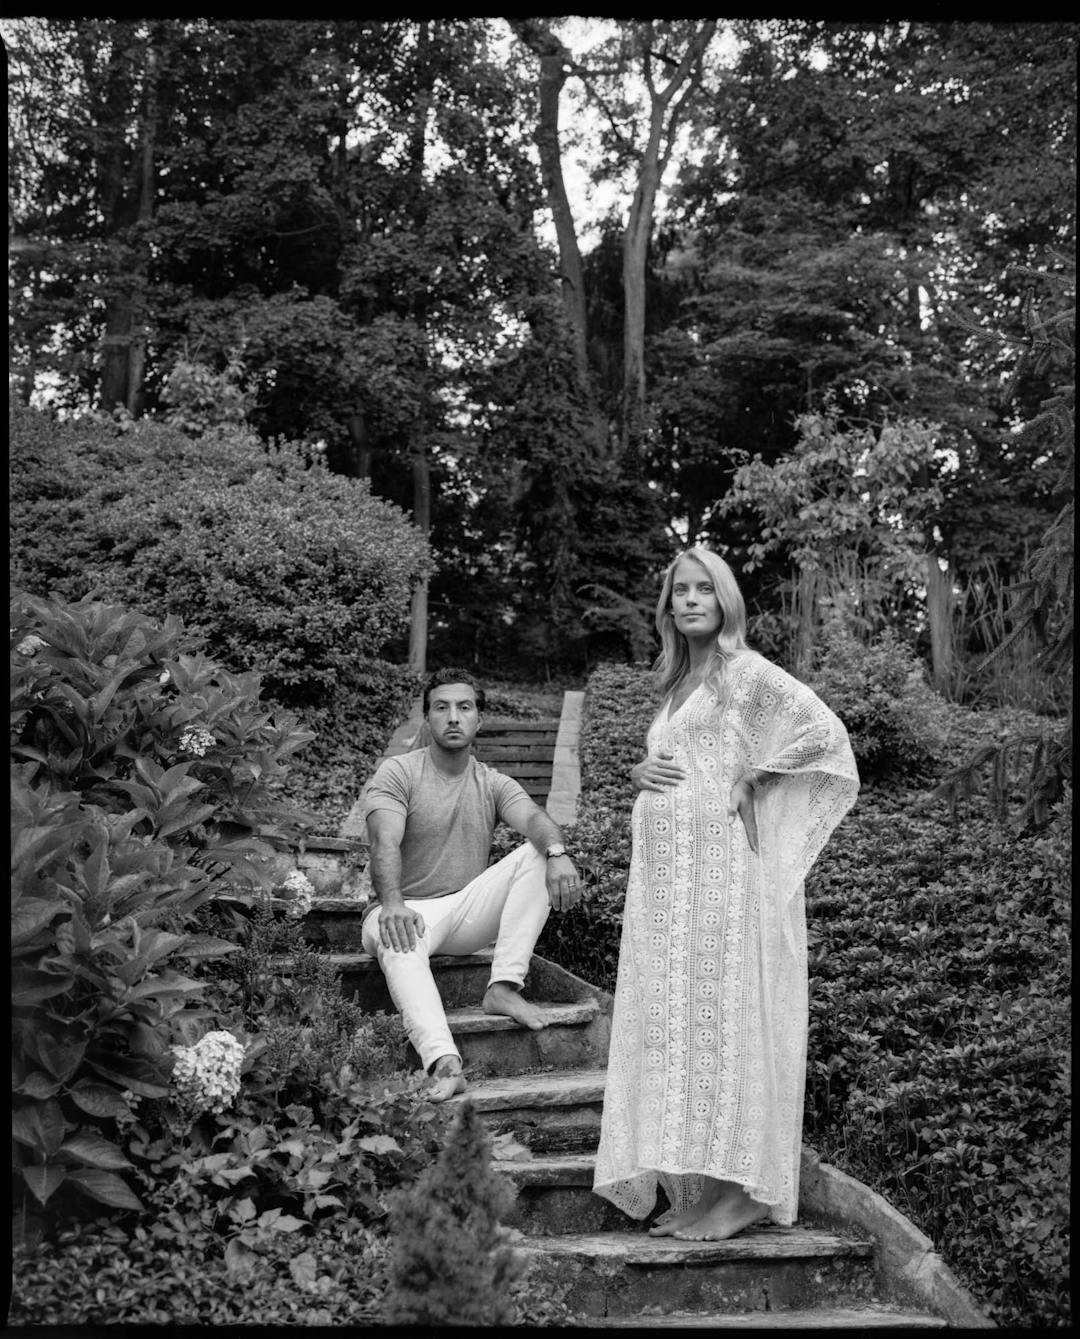 black and white medium format maternity portrait of woman in white dress holding belly with man seated on stone stairs